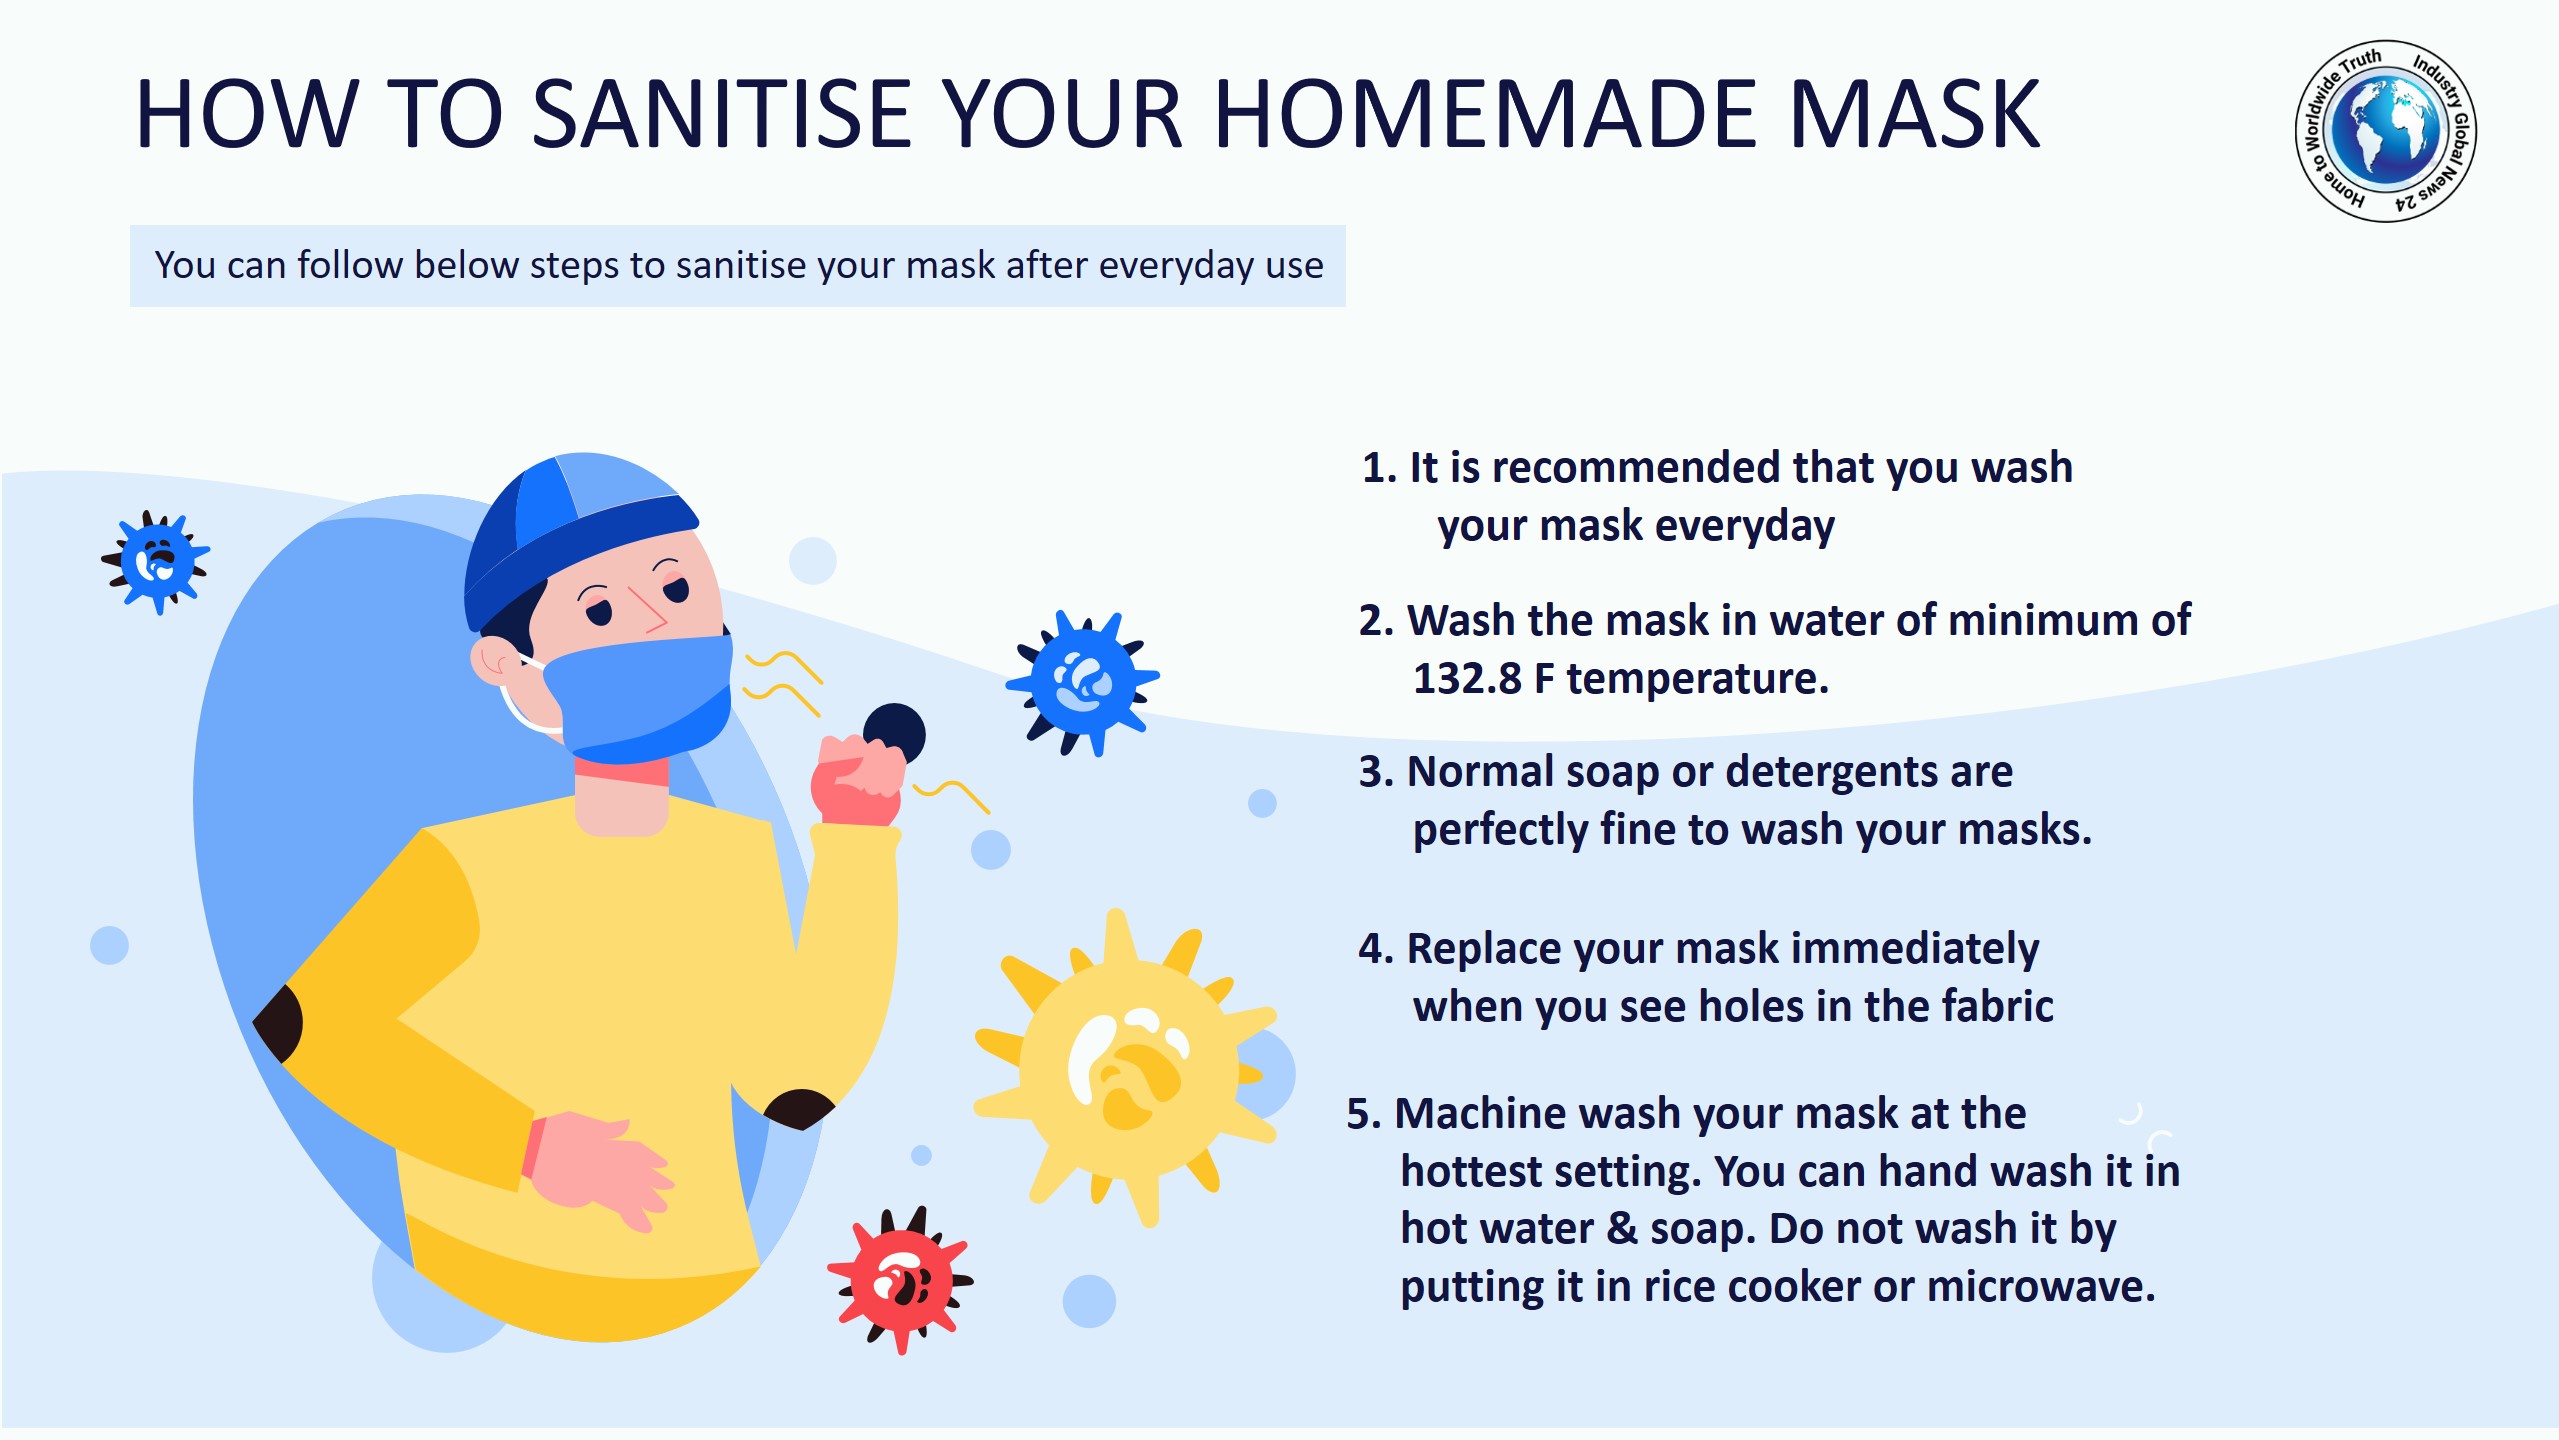 How to sanitise your homemade mask